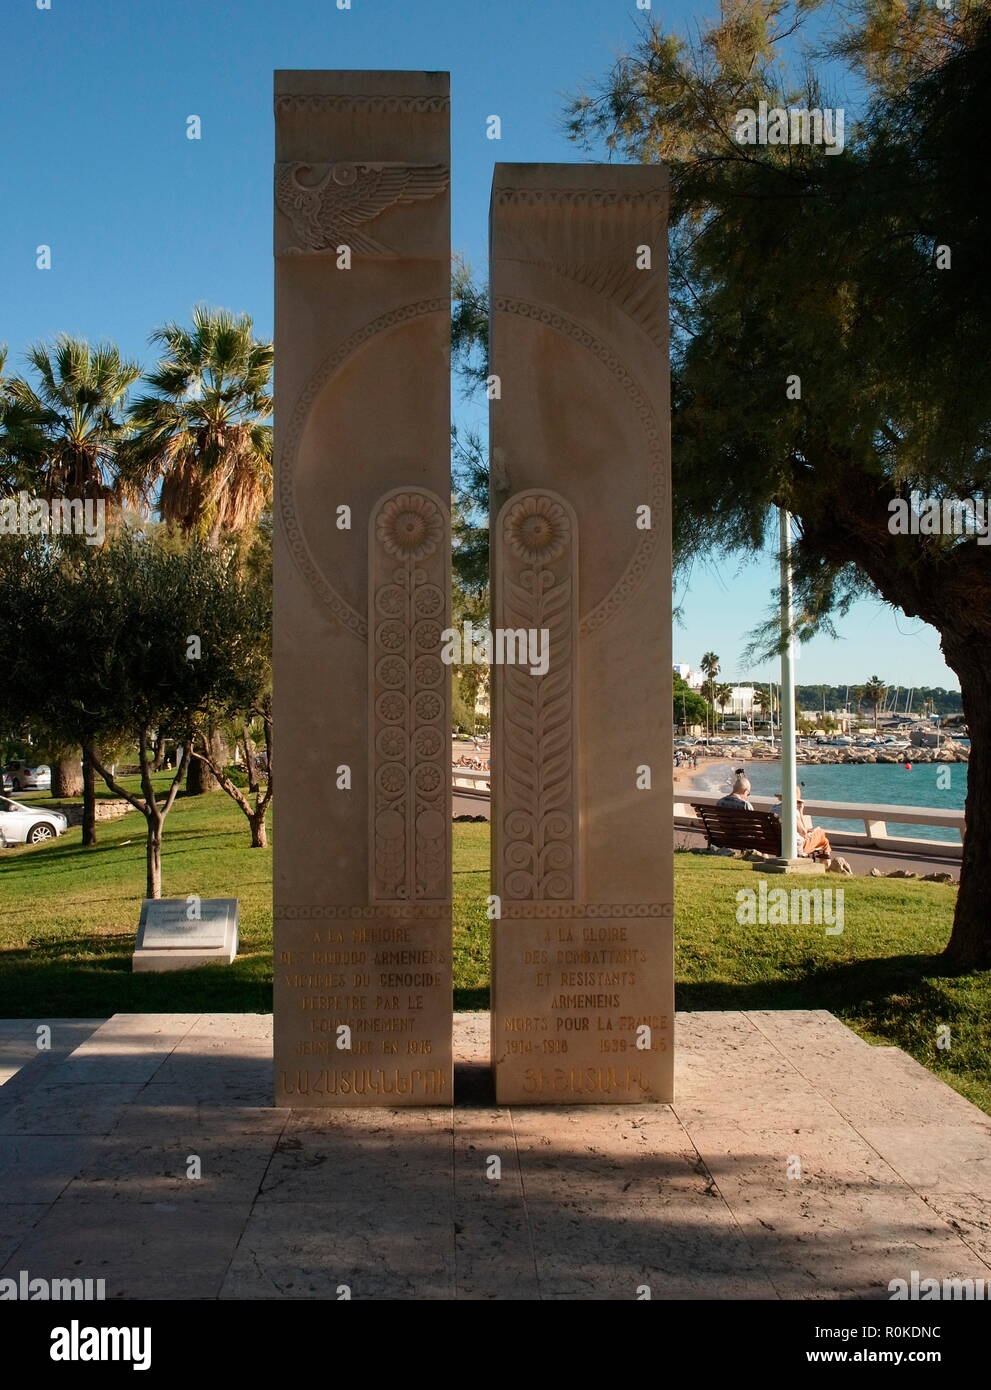 AJAXNETPHOTO. 2018. CANNES, FRANCE. - MEMORIAL MONUMENT TO 150,000 ARMENIANS KILLED IN A GENOCIDE IN 1915 AND TO MEMBERS OF THE ARMENIAN RESISTANCE WHO DIED FOR FRANCE IN BOTH WORLD WARS; (1914-18 AND 1939-45). PHOTO:JONATHAN EASTLAND/AJAX REF: GXR180310 703 Stock Photo